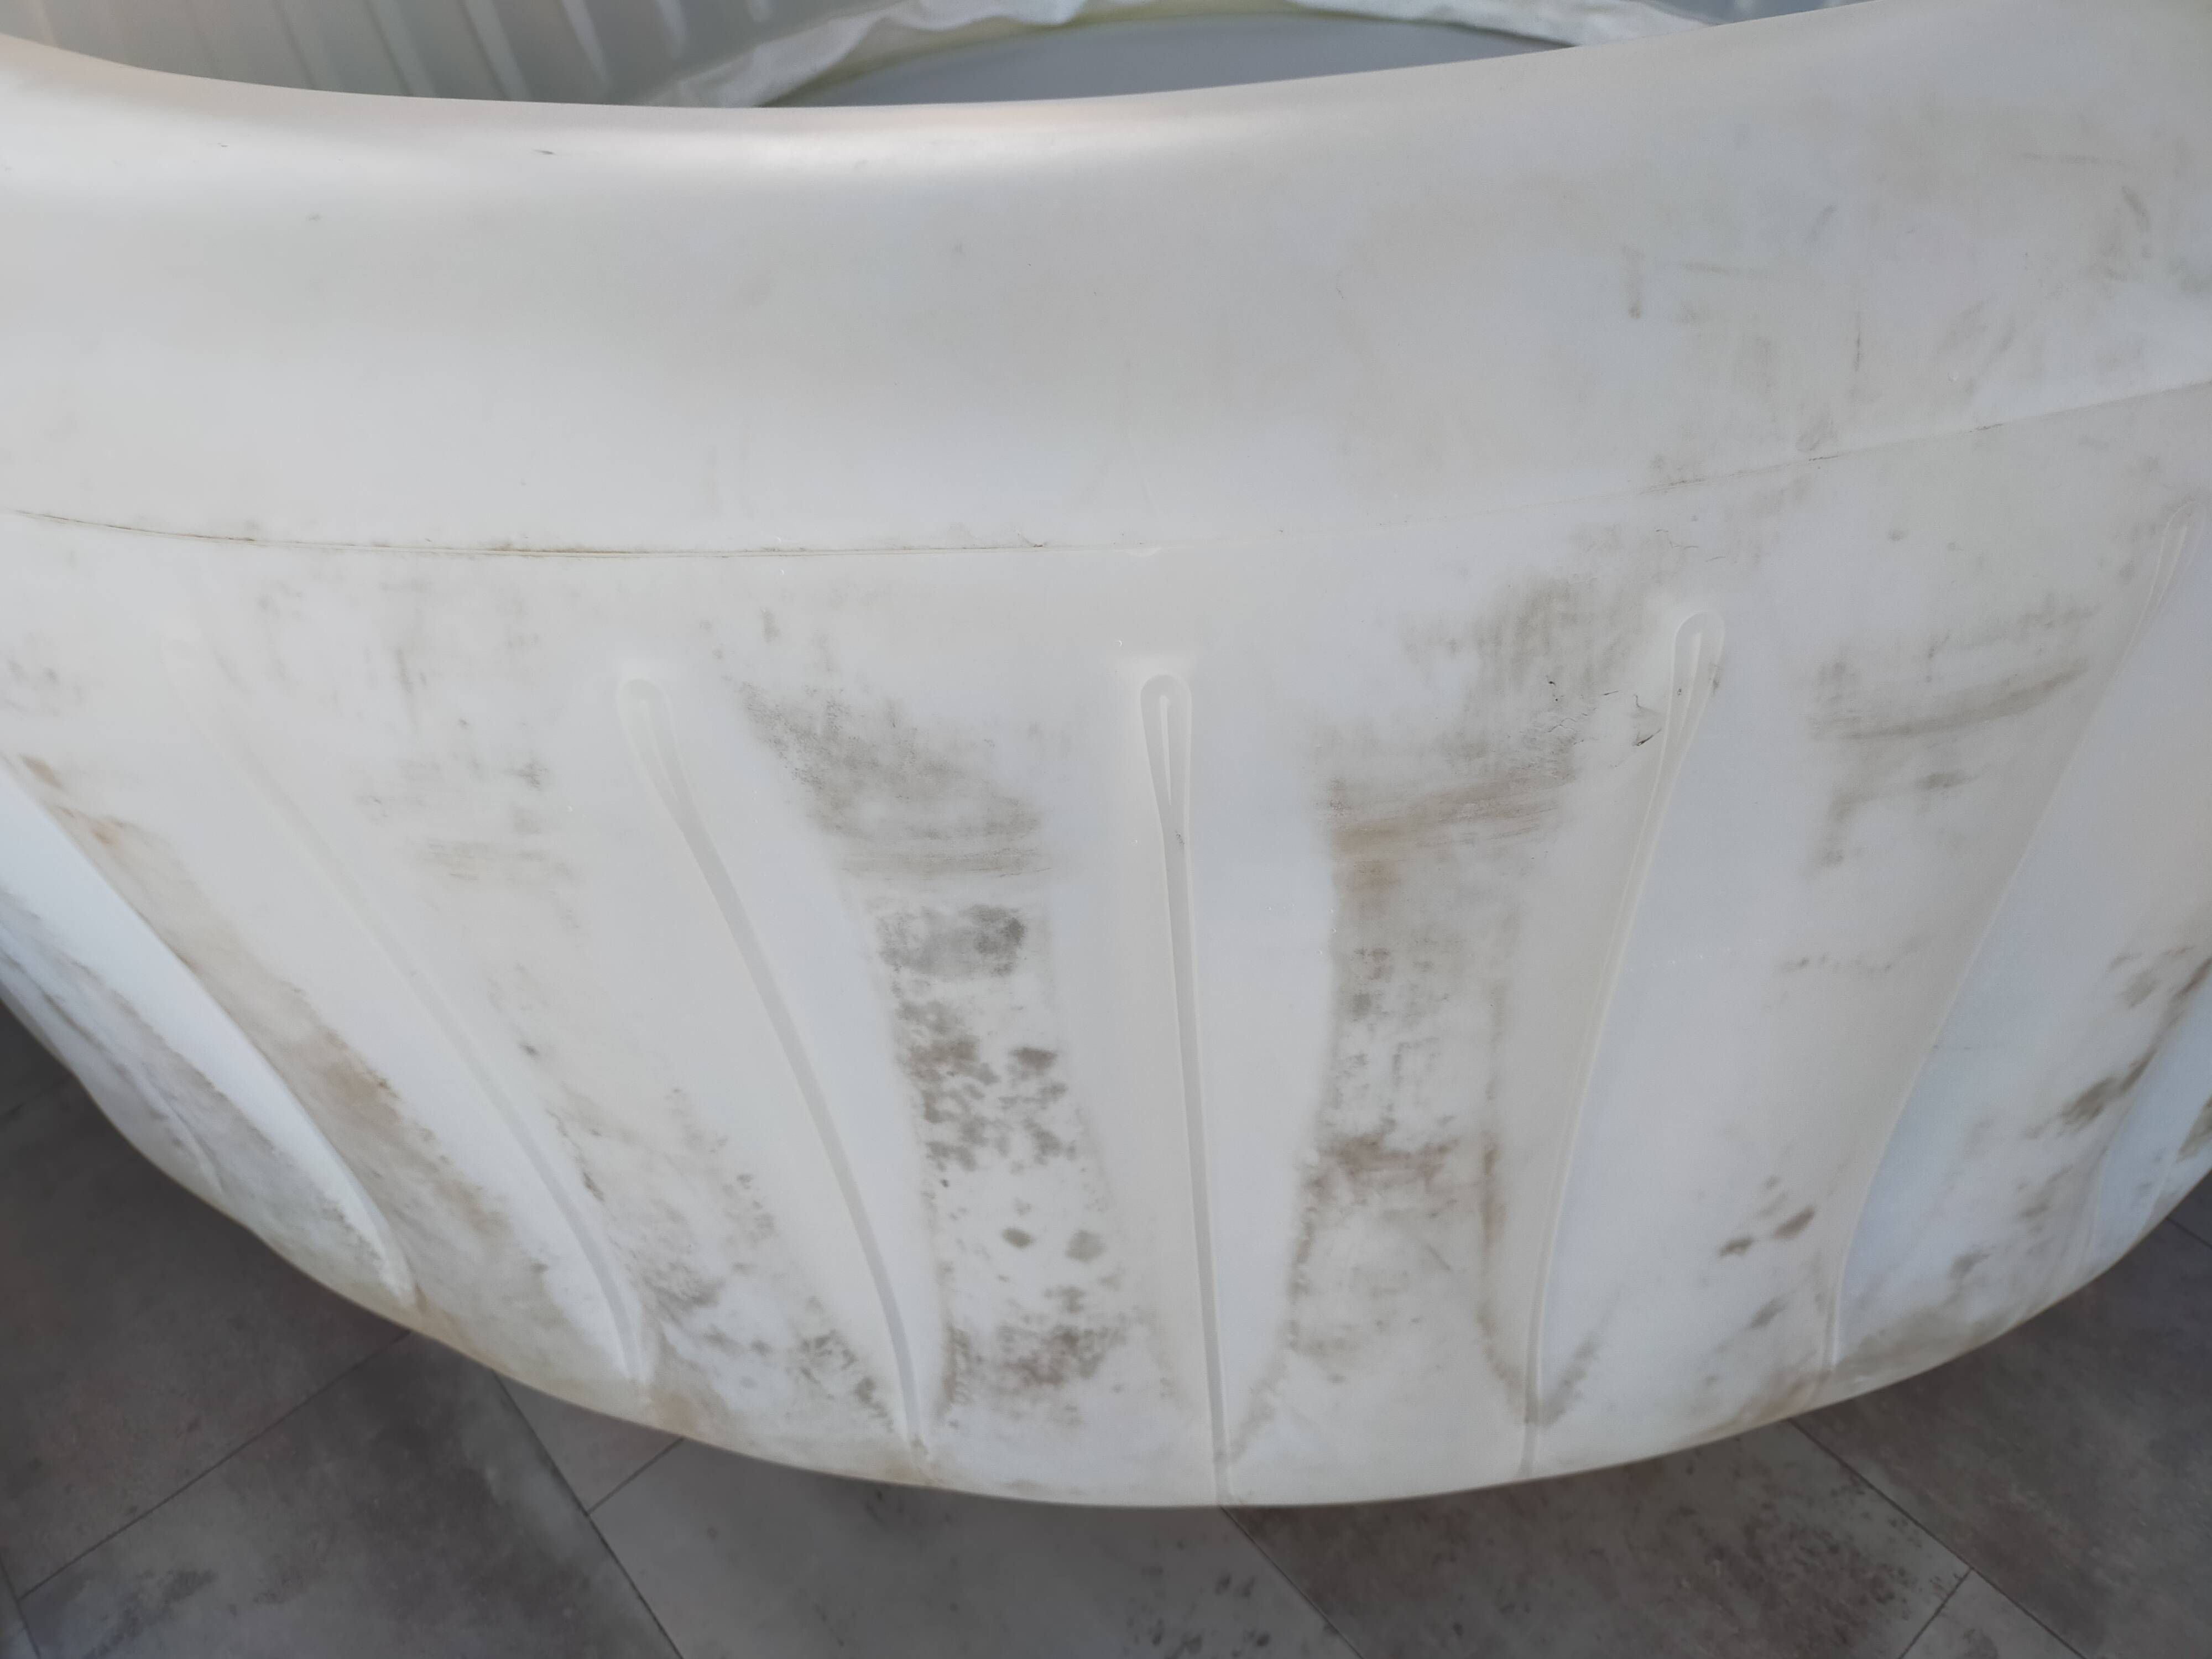 How to Clean Mold from Inflatable Hot Tub?